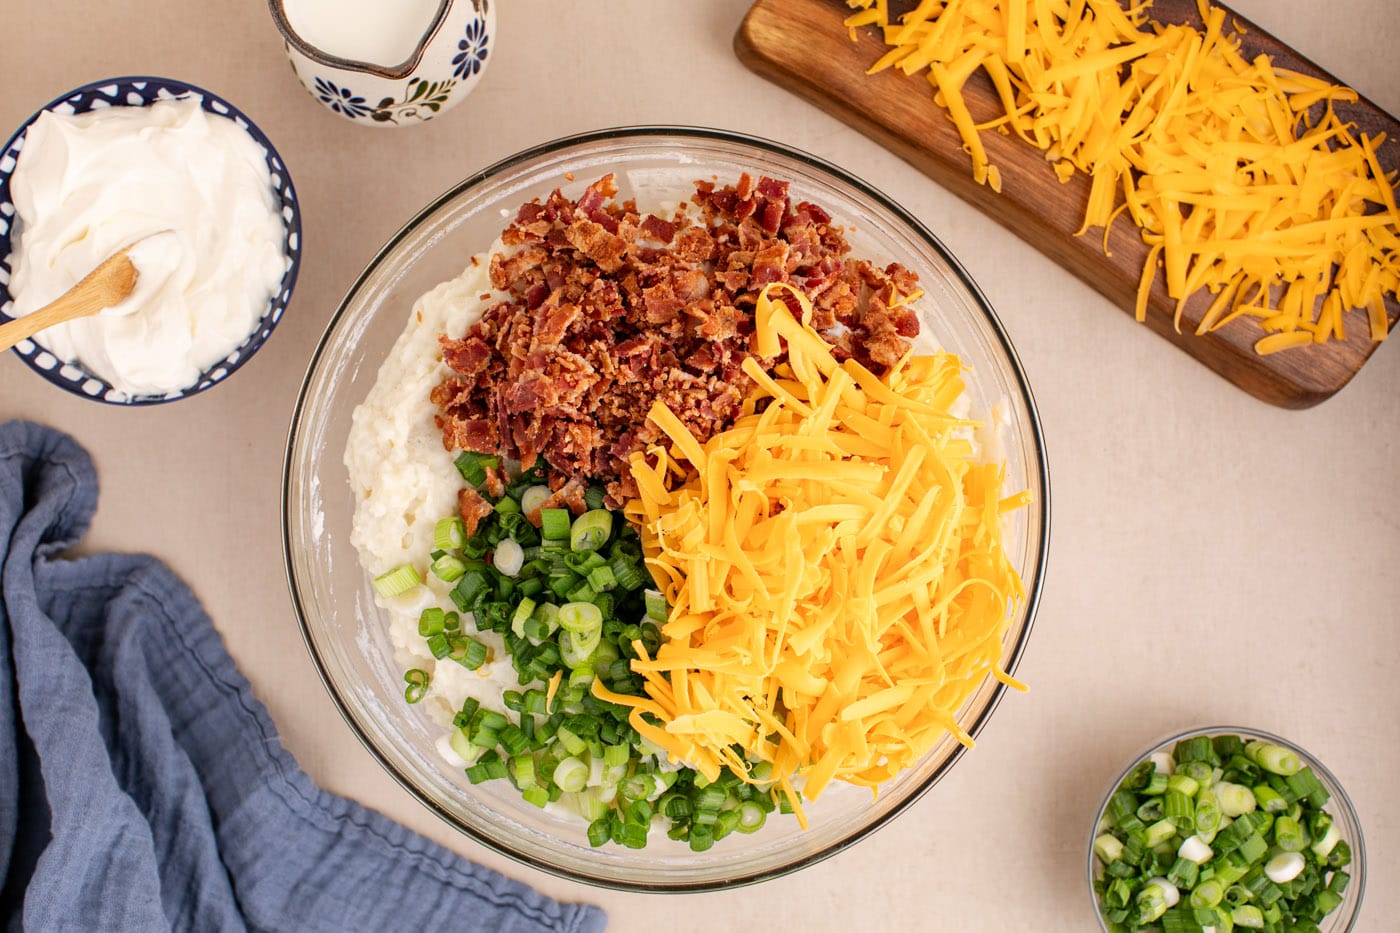 bacon, cheese, and green onion added to twice baked potato filling